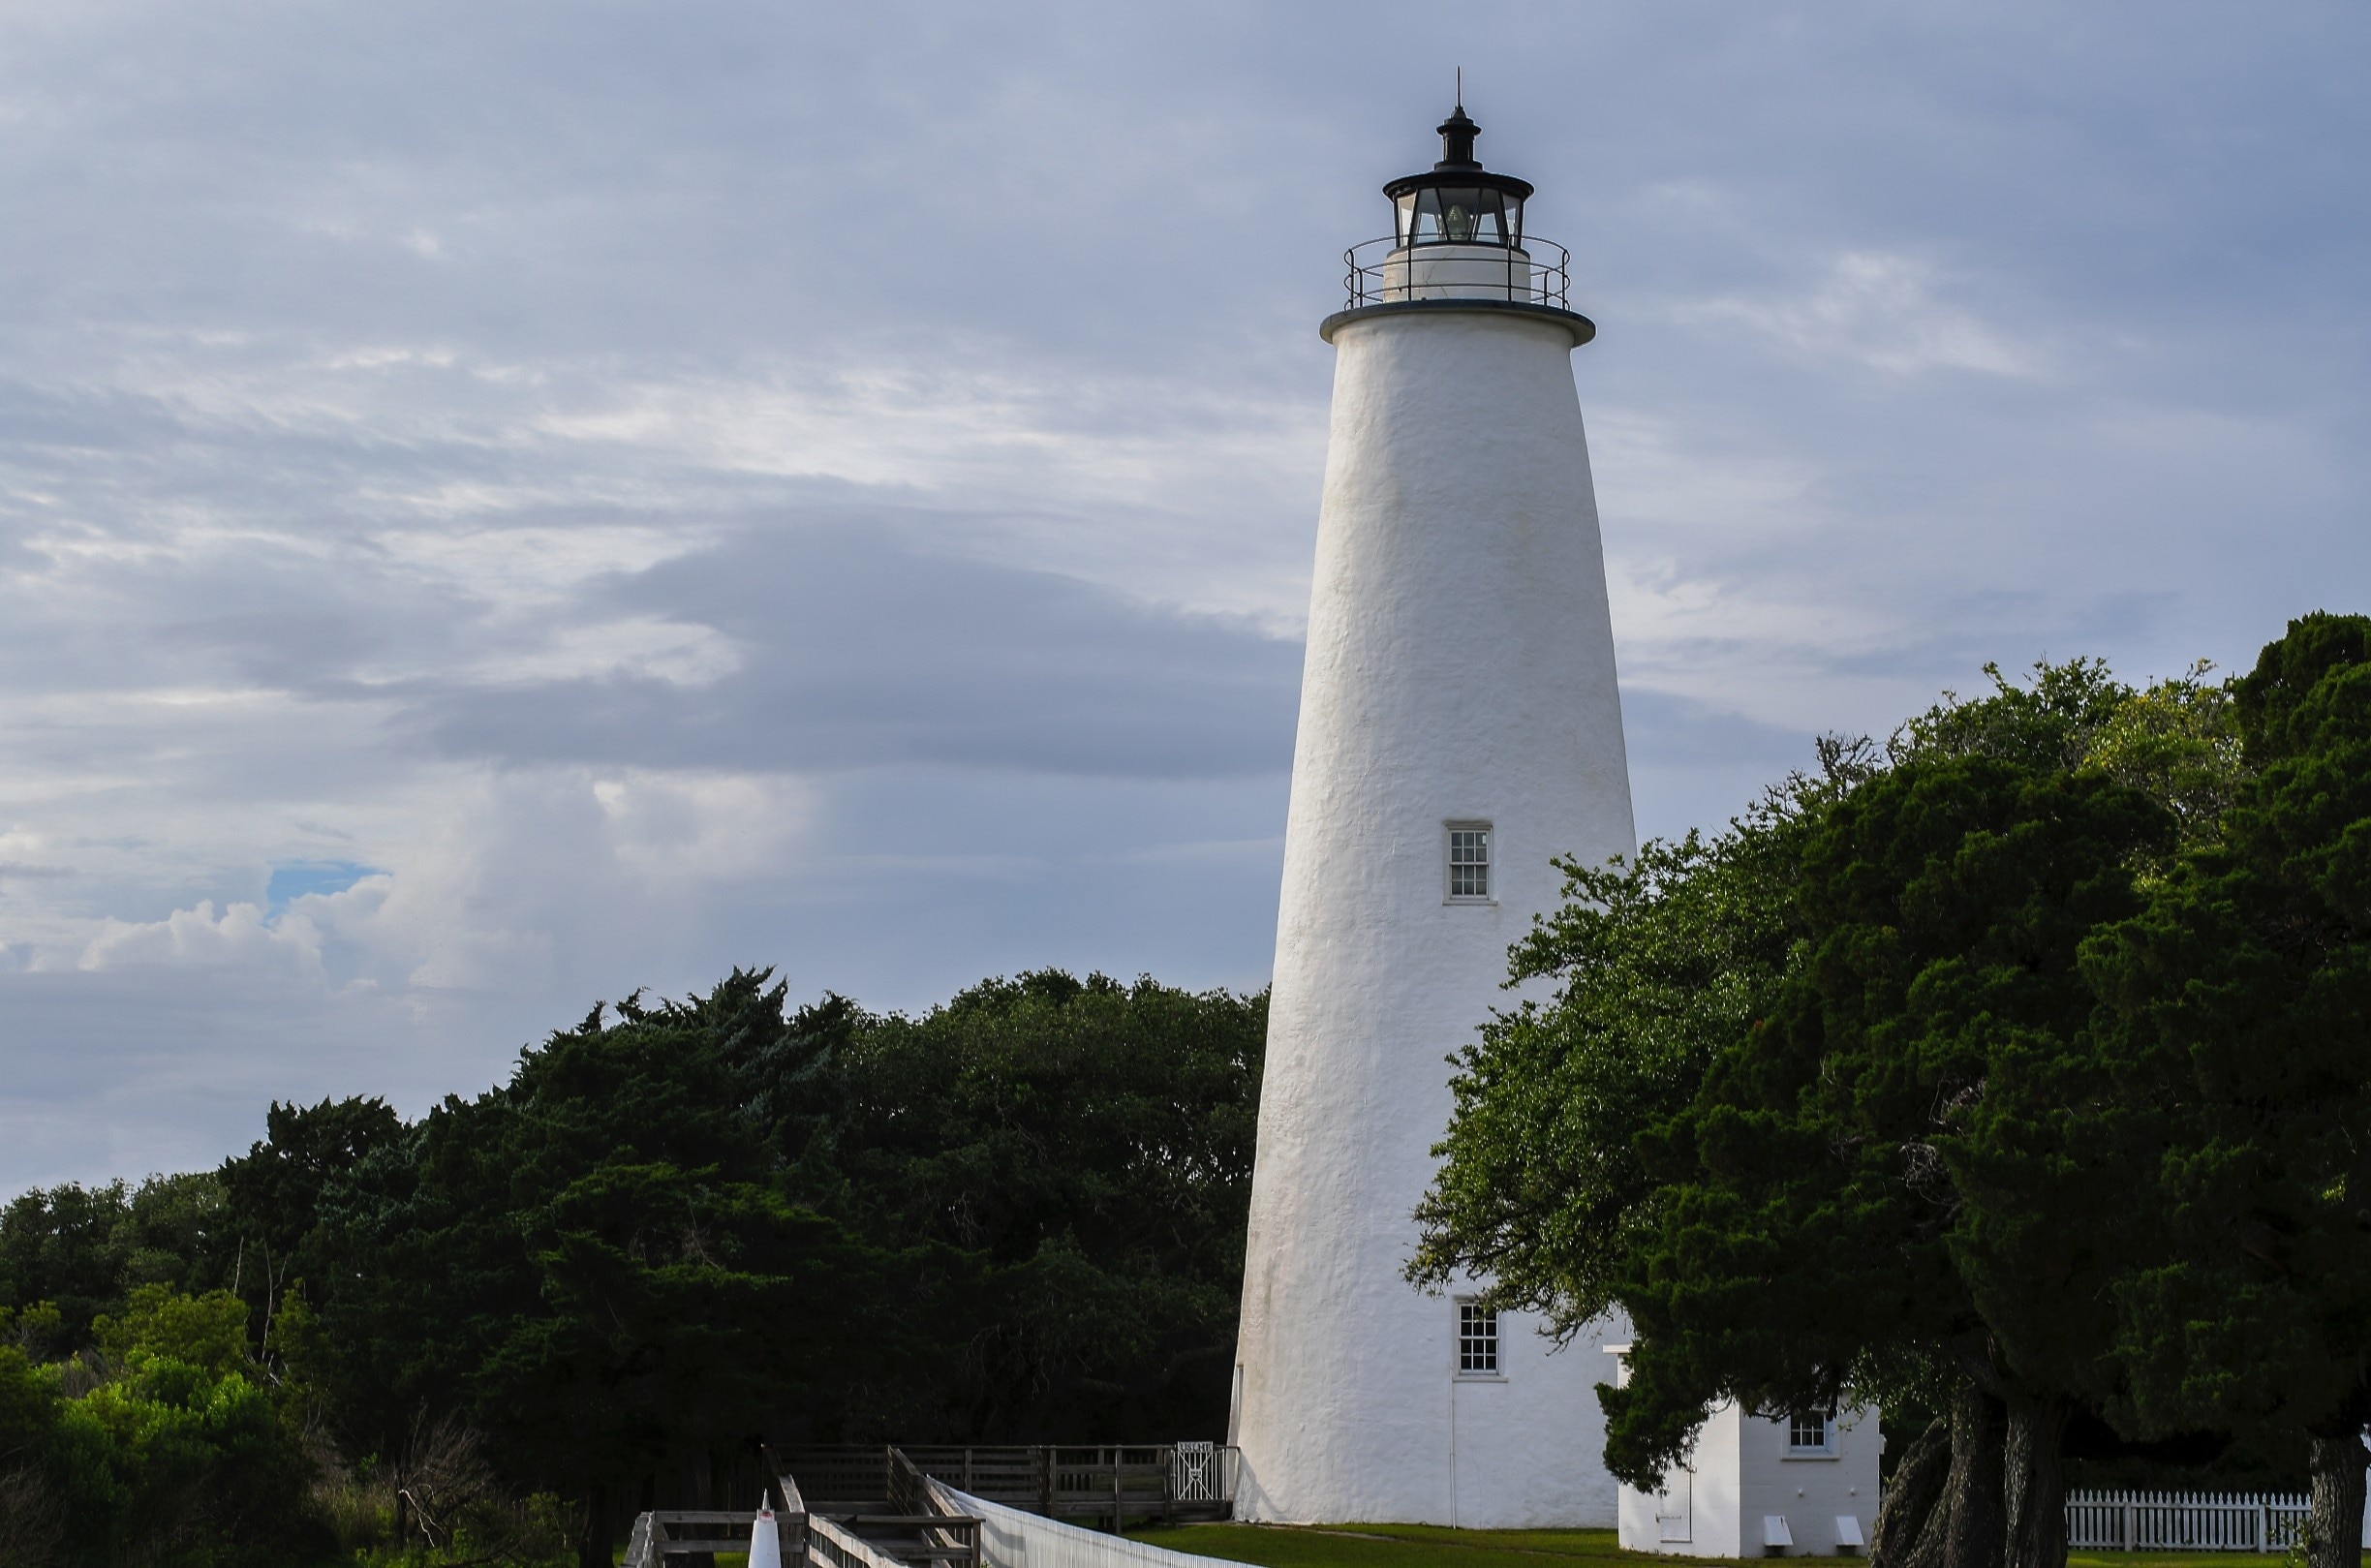 Remote and only reachable via a ferry, the Ocracoke Lighthouse is quaint and beautiful but can only be viewed from the outside.  They do not allow you inside the lighthouse.
View a complete video guide of the lighthouse here:  https://www.hdcarolina.com/episode/ocracoke-lighthouse
#BeachBound